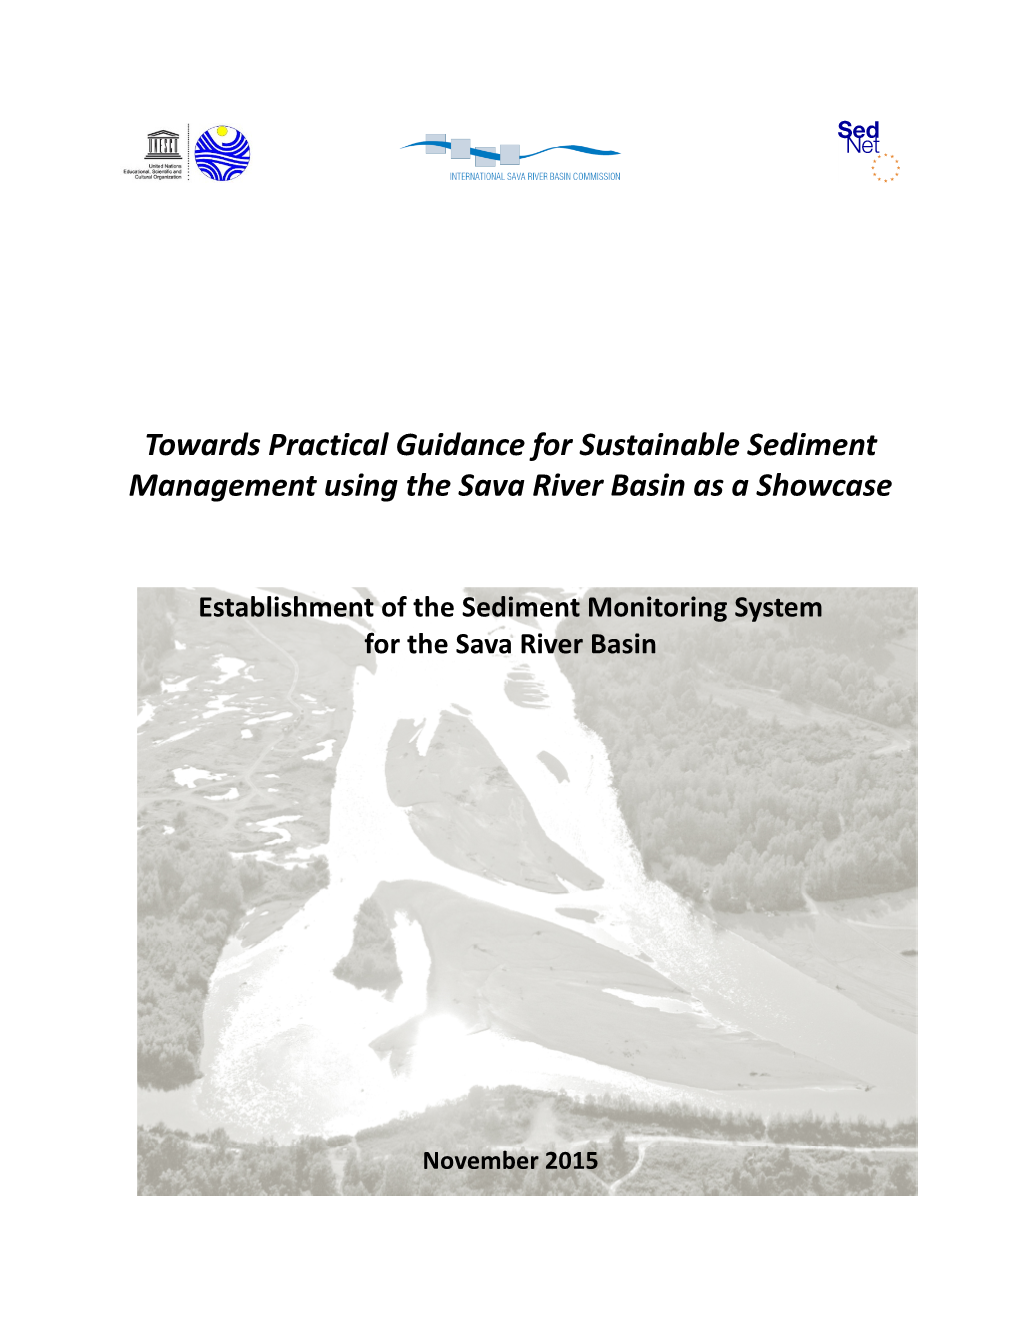 Towards Practical Guidance for Sustainable Sediment Management Using the Sava River Basin As a Showcase